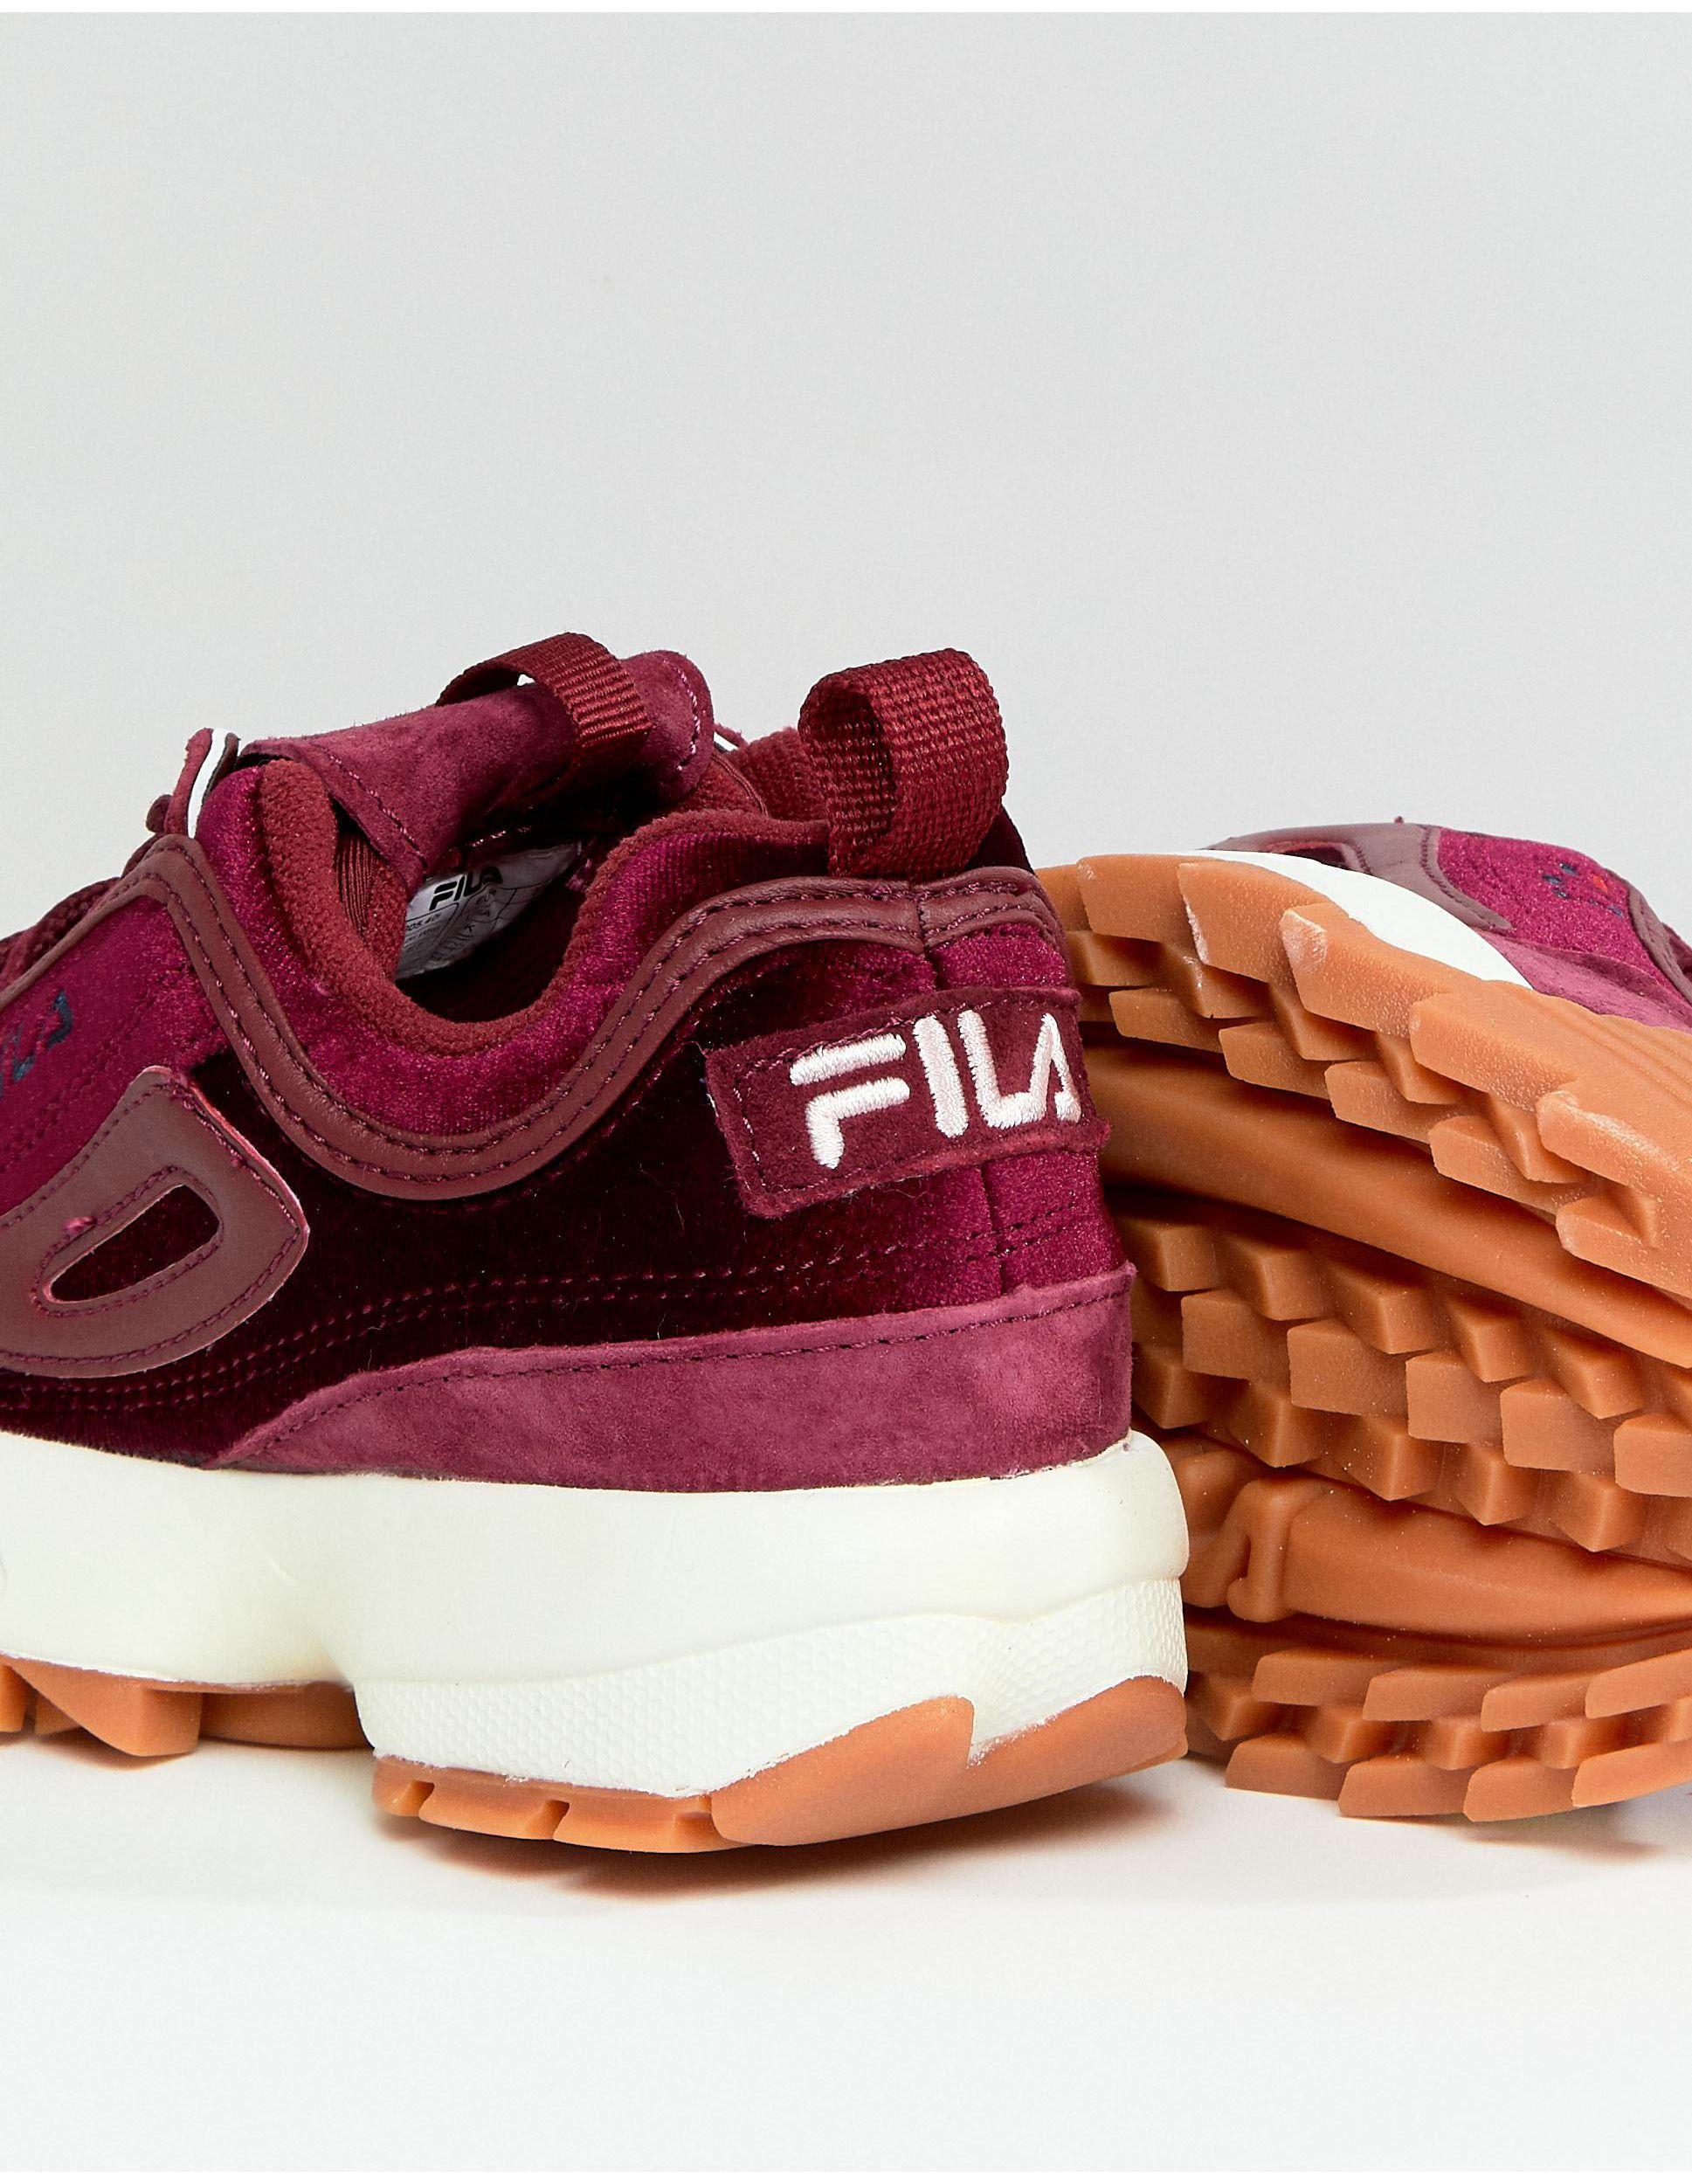 Red Velvet Fila Trainers Clearance - www.cantinascacciadiavoli.it 1694857299